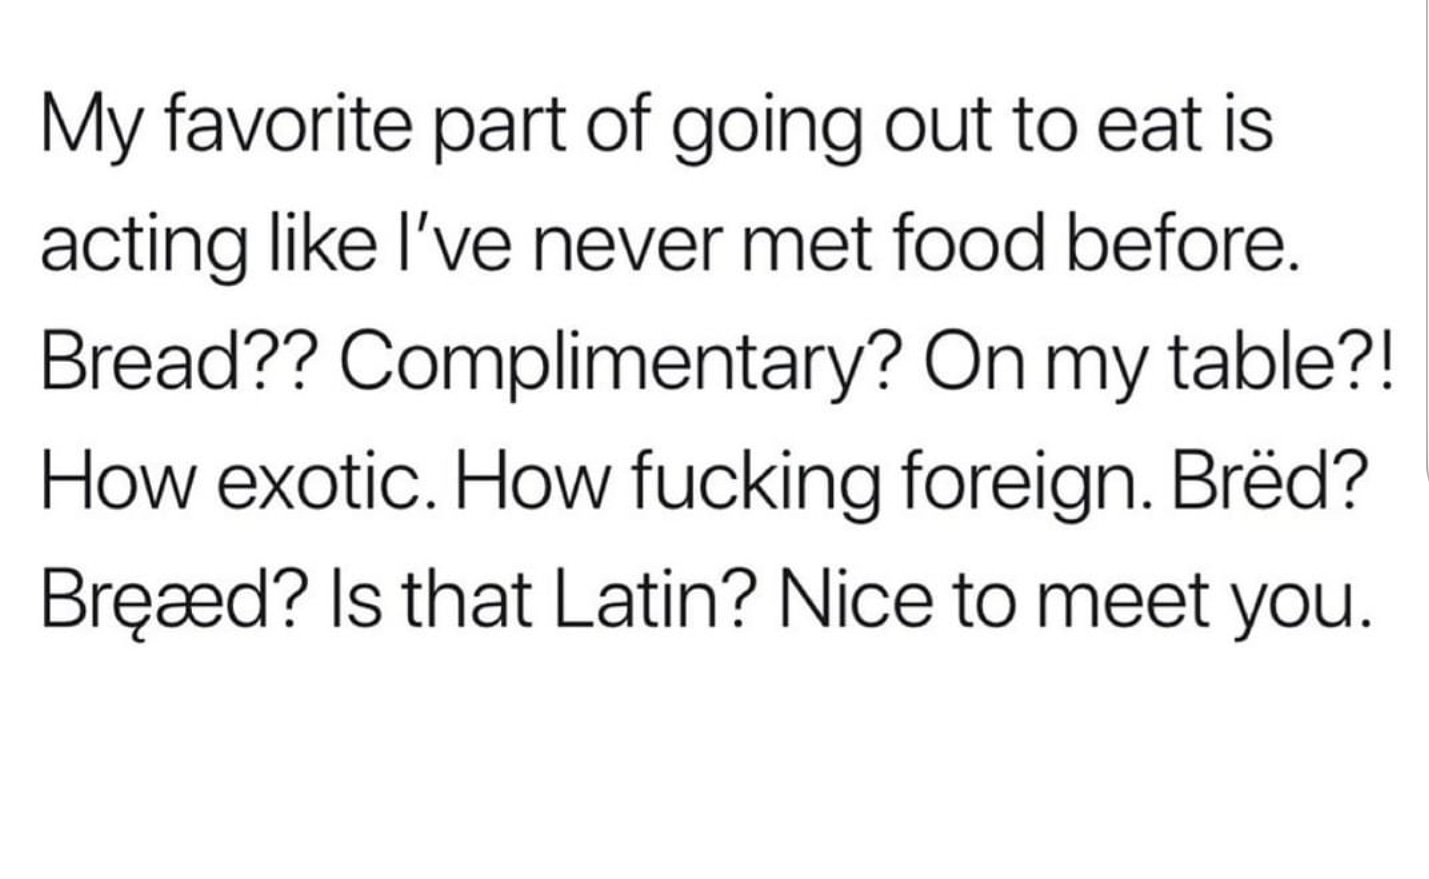 My favorite part of going out to eat is acting I've never met food before. Bread?? Complimentary? On my table?! How exotic. How fucking foreign. Brd? Brd? Is that Latin? Nice to meet you.